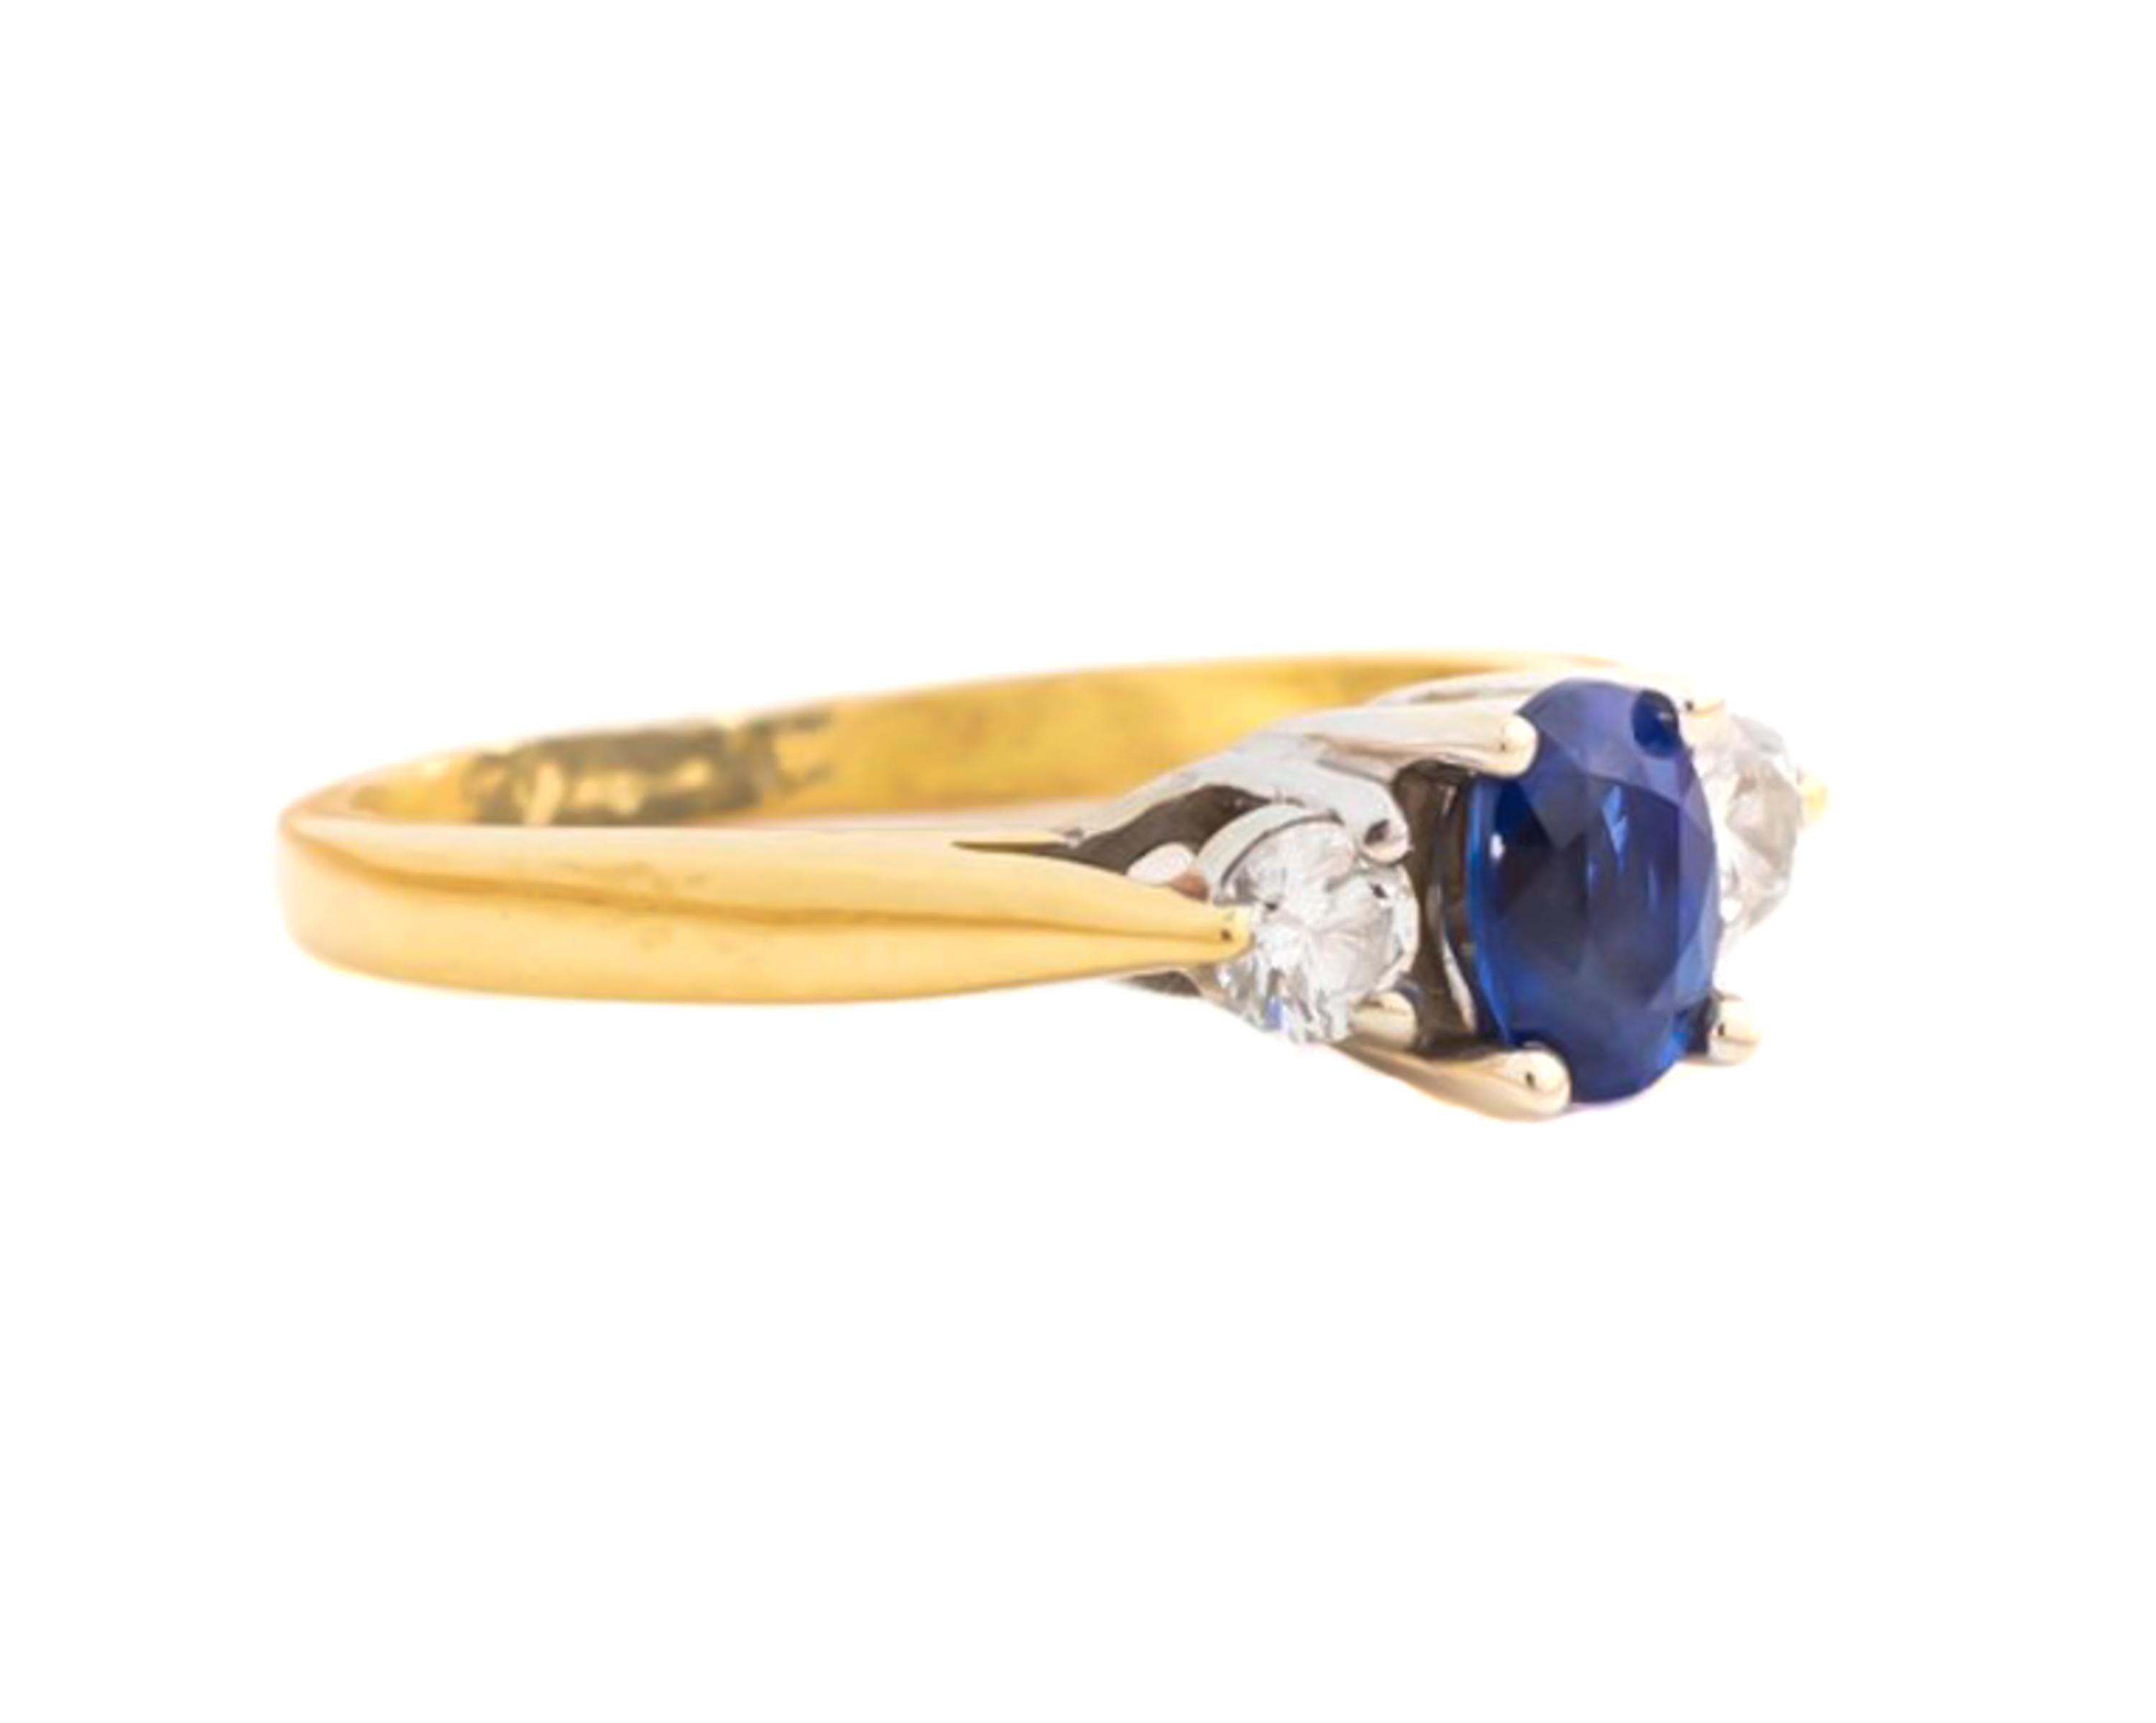 Features:
High cathedral setting crafted in 18 karat yellow gold 
Center Stone - 0.50 carat Oval Cut Sapphire, 4-prong set
Accent Diamonds - 0.30 carat total weight, 3-prong set
All stones are mounted in 18 karat white gold

Made in France

This